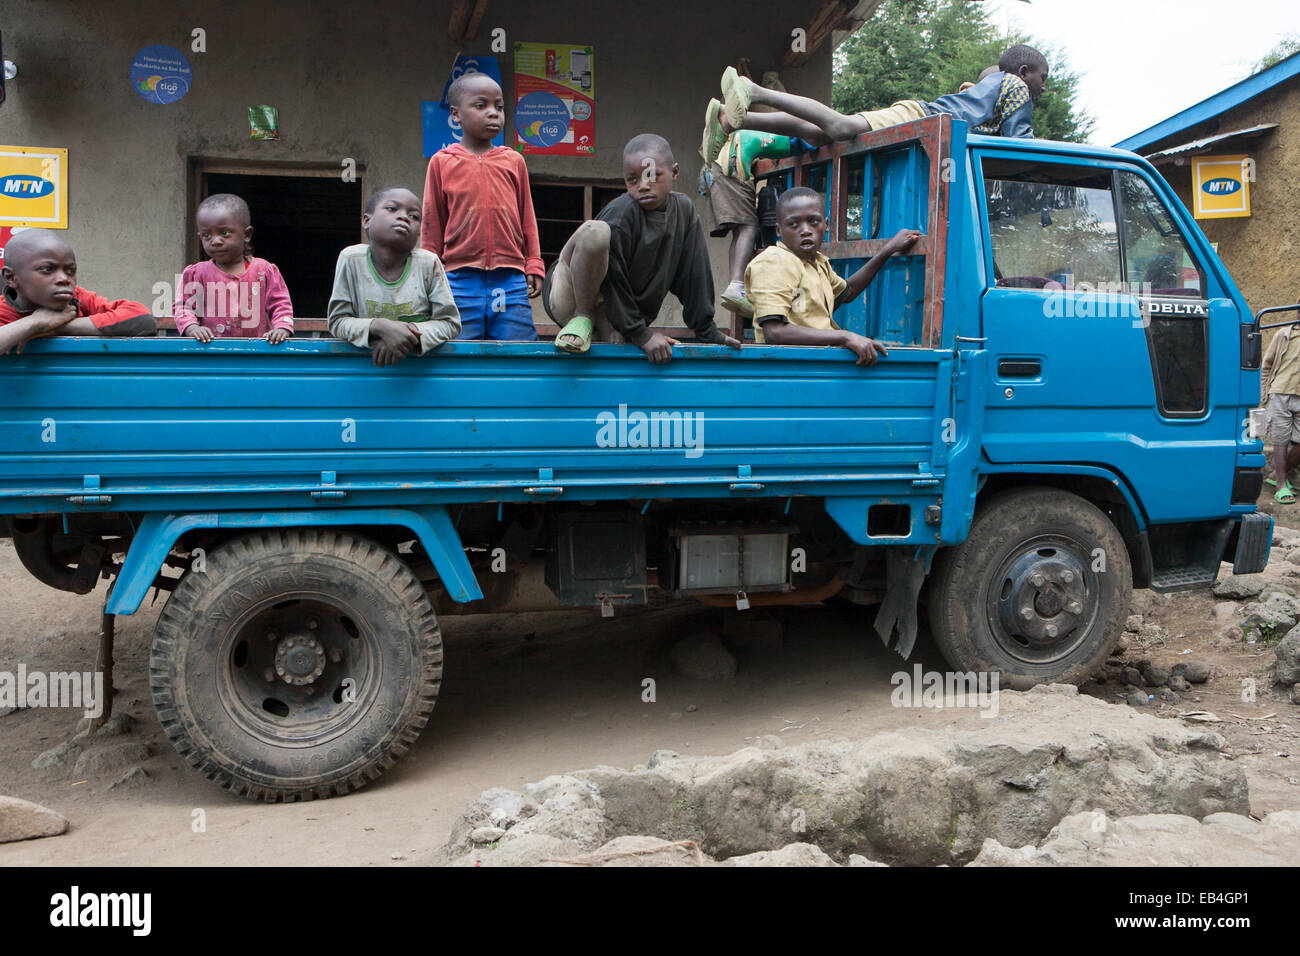 A group of young children sit in and climb on a truck. Stock Photo